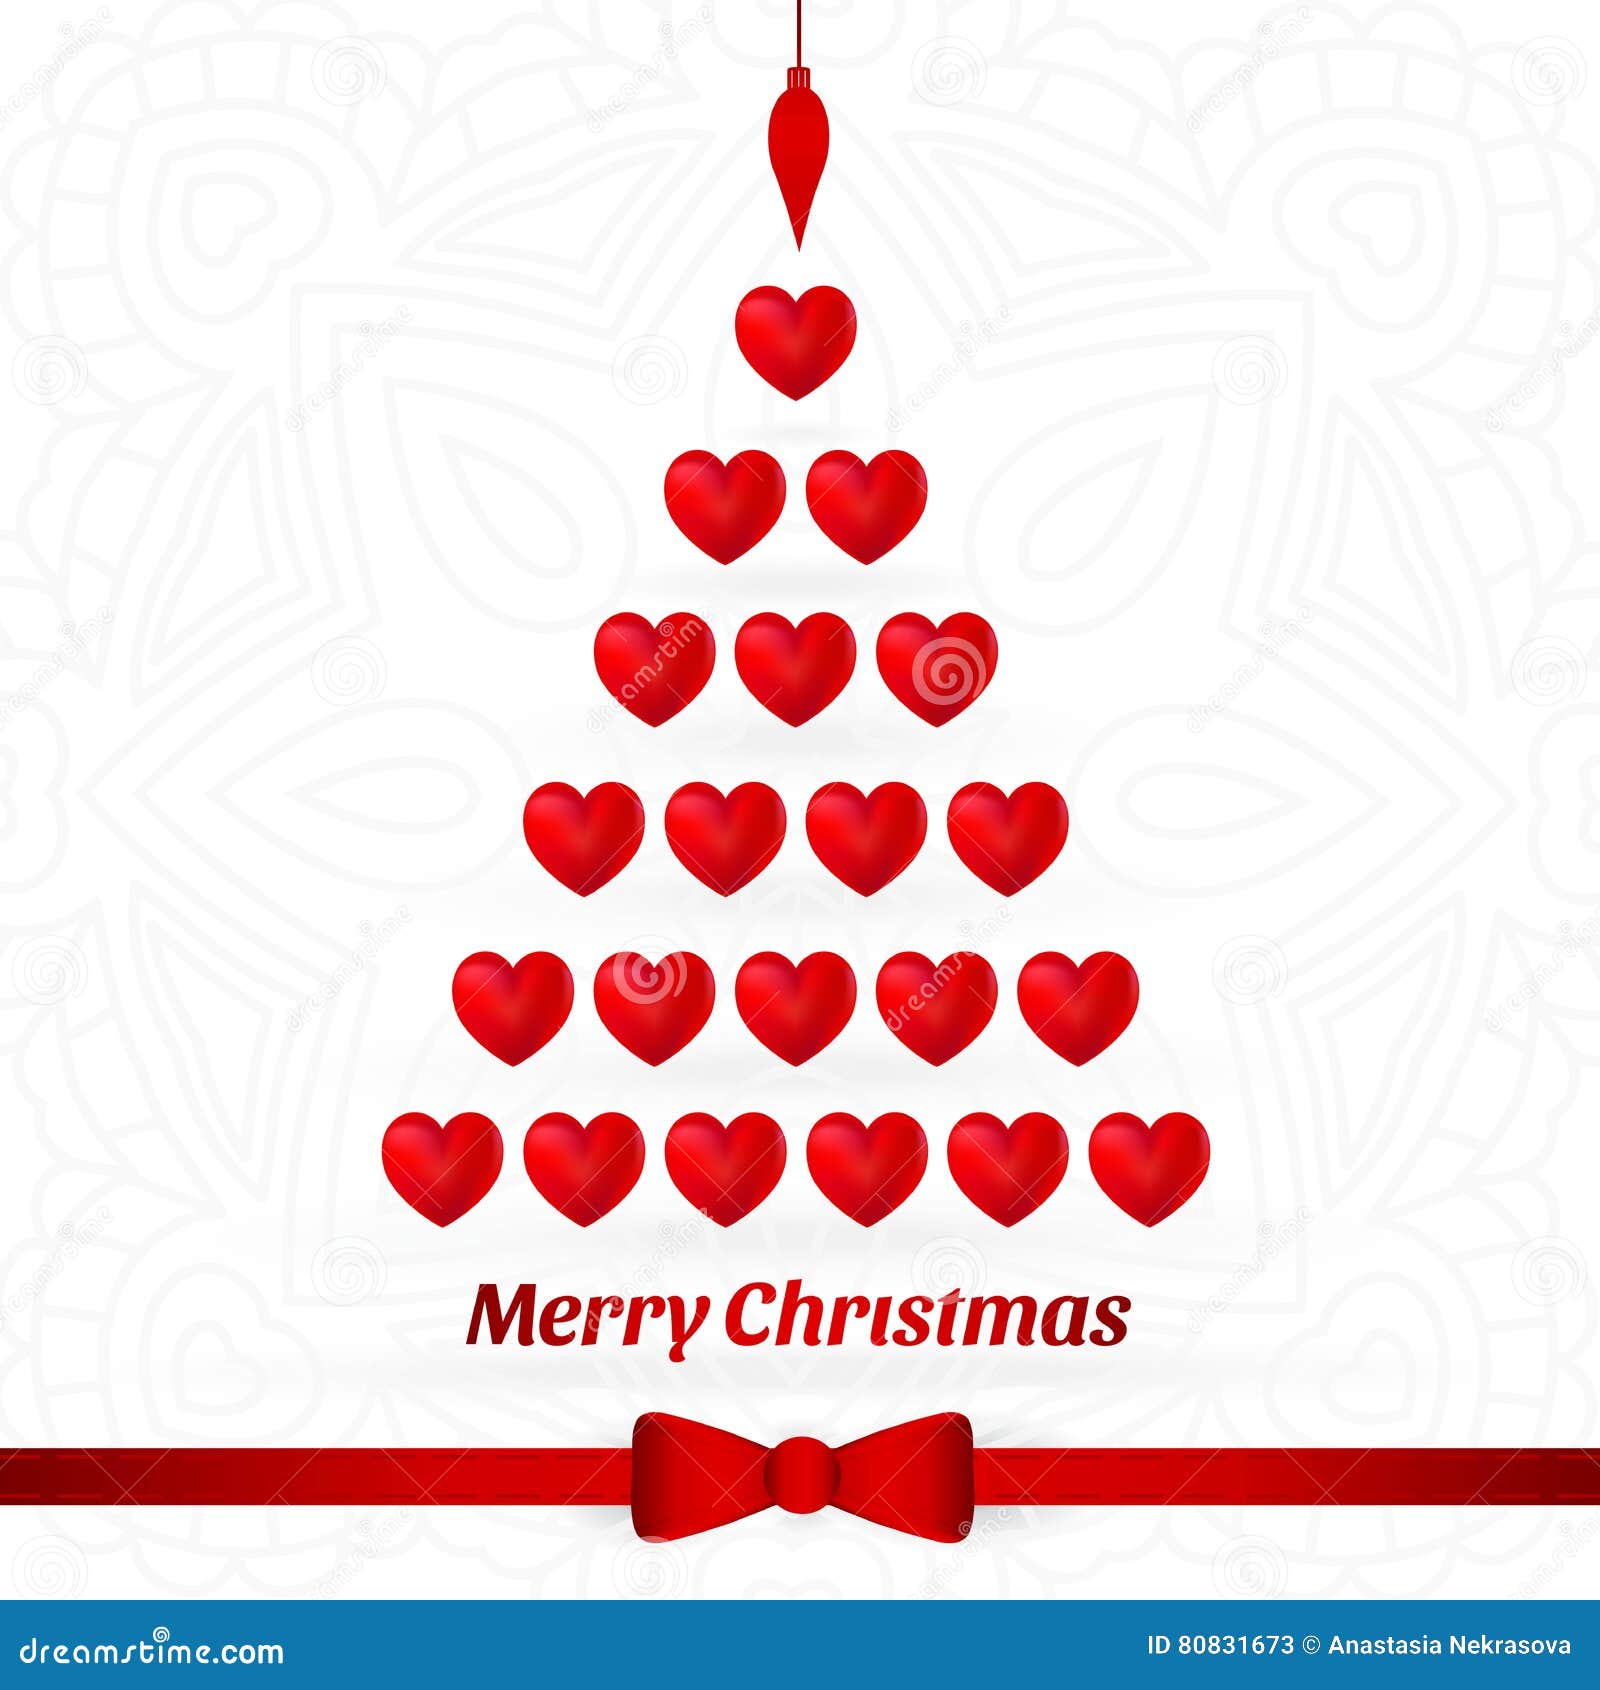 Christmas tree made of red ribbon on bright Vector Image